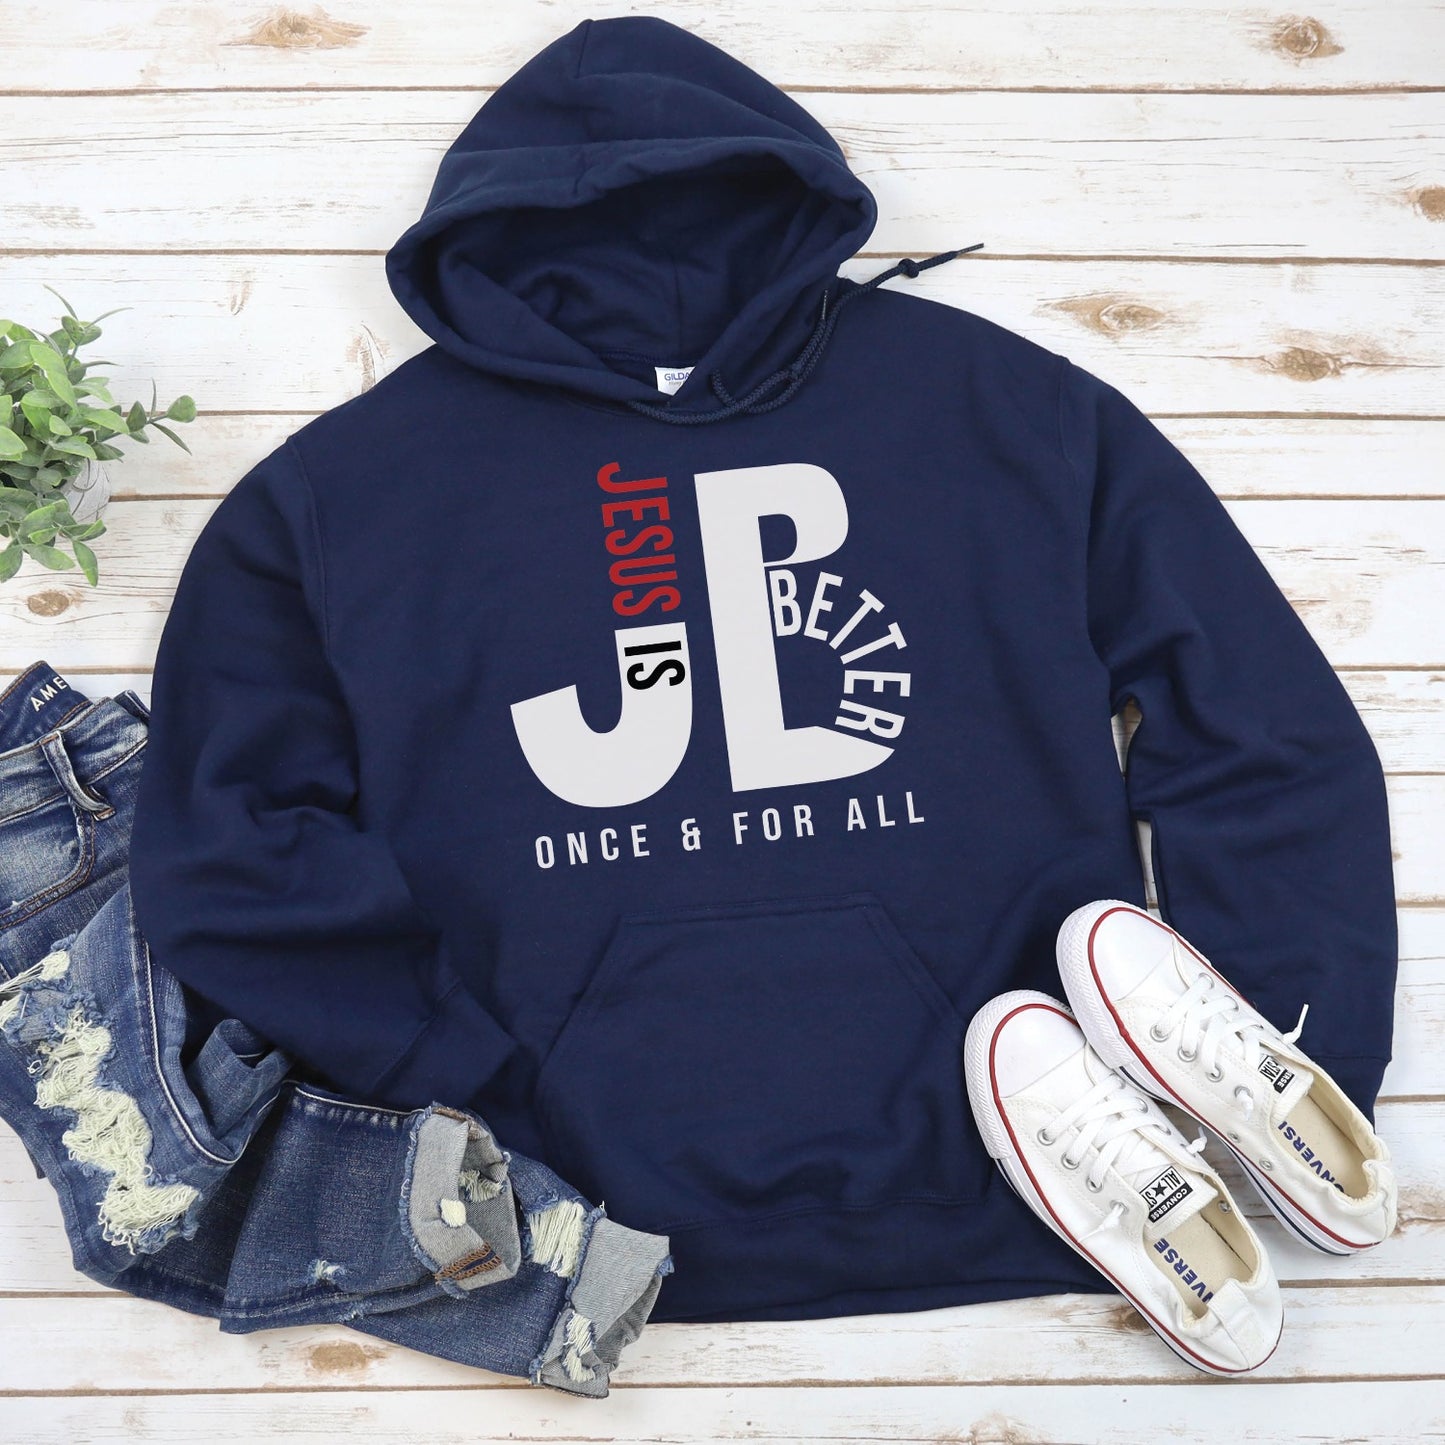 "JB" typography "Jesus is Better Once and For All" design in white and red letters, based on the Christian bible book of Hebrews, printed on a navy blue color cozy unisex hoodie, created for faith-based men and women, great father's day gift for Dad